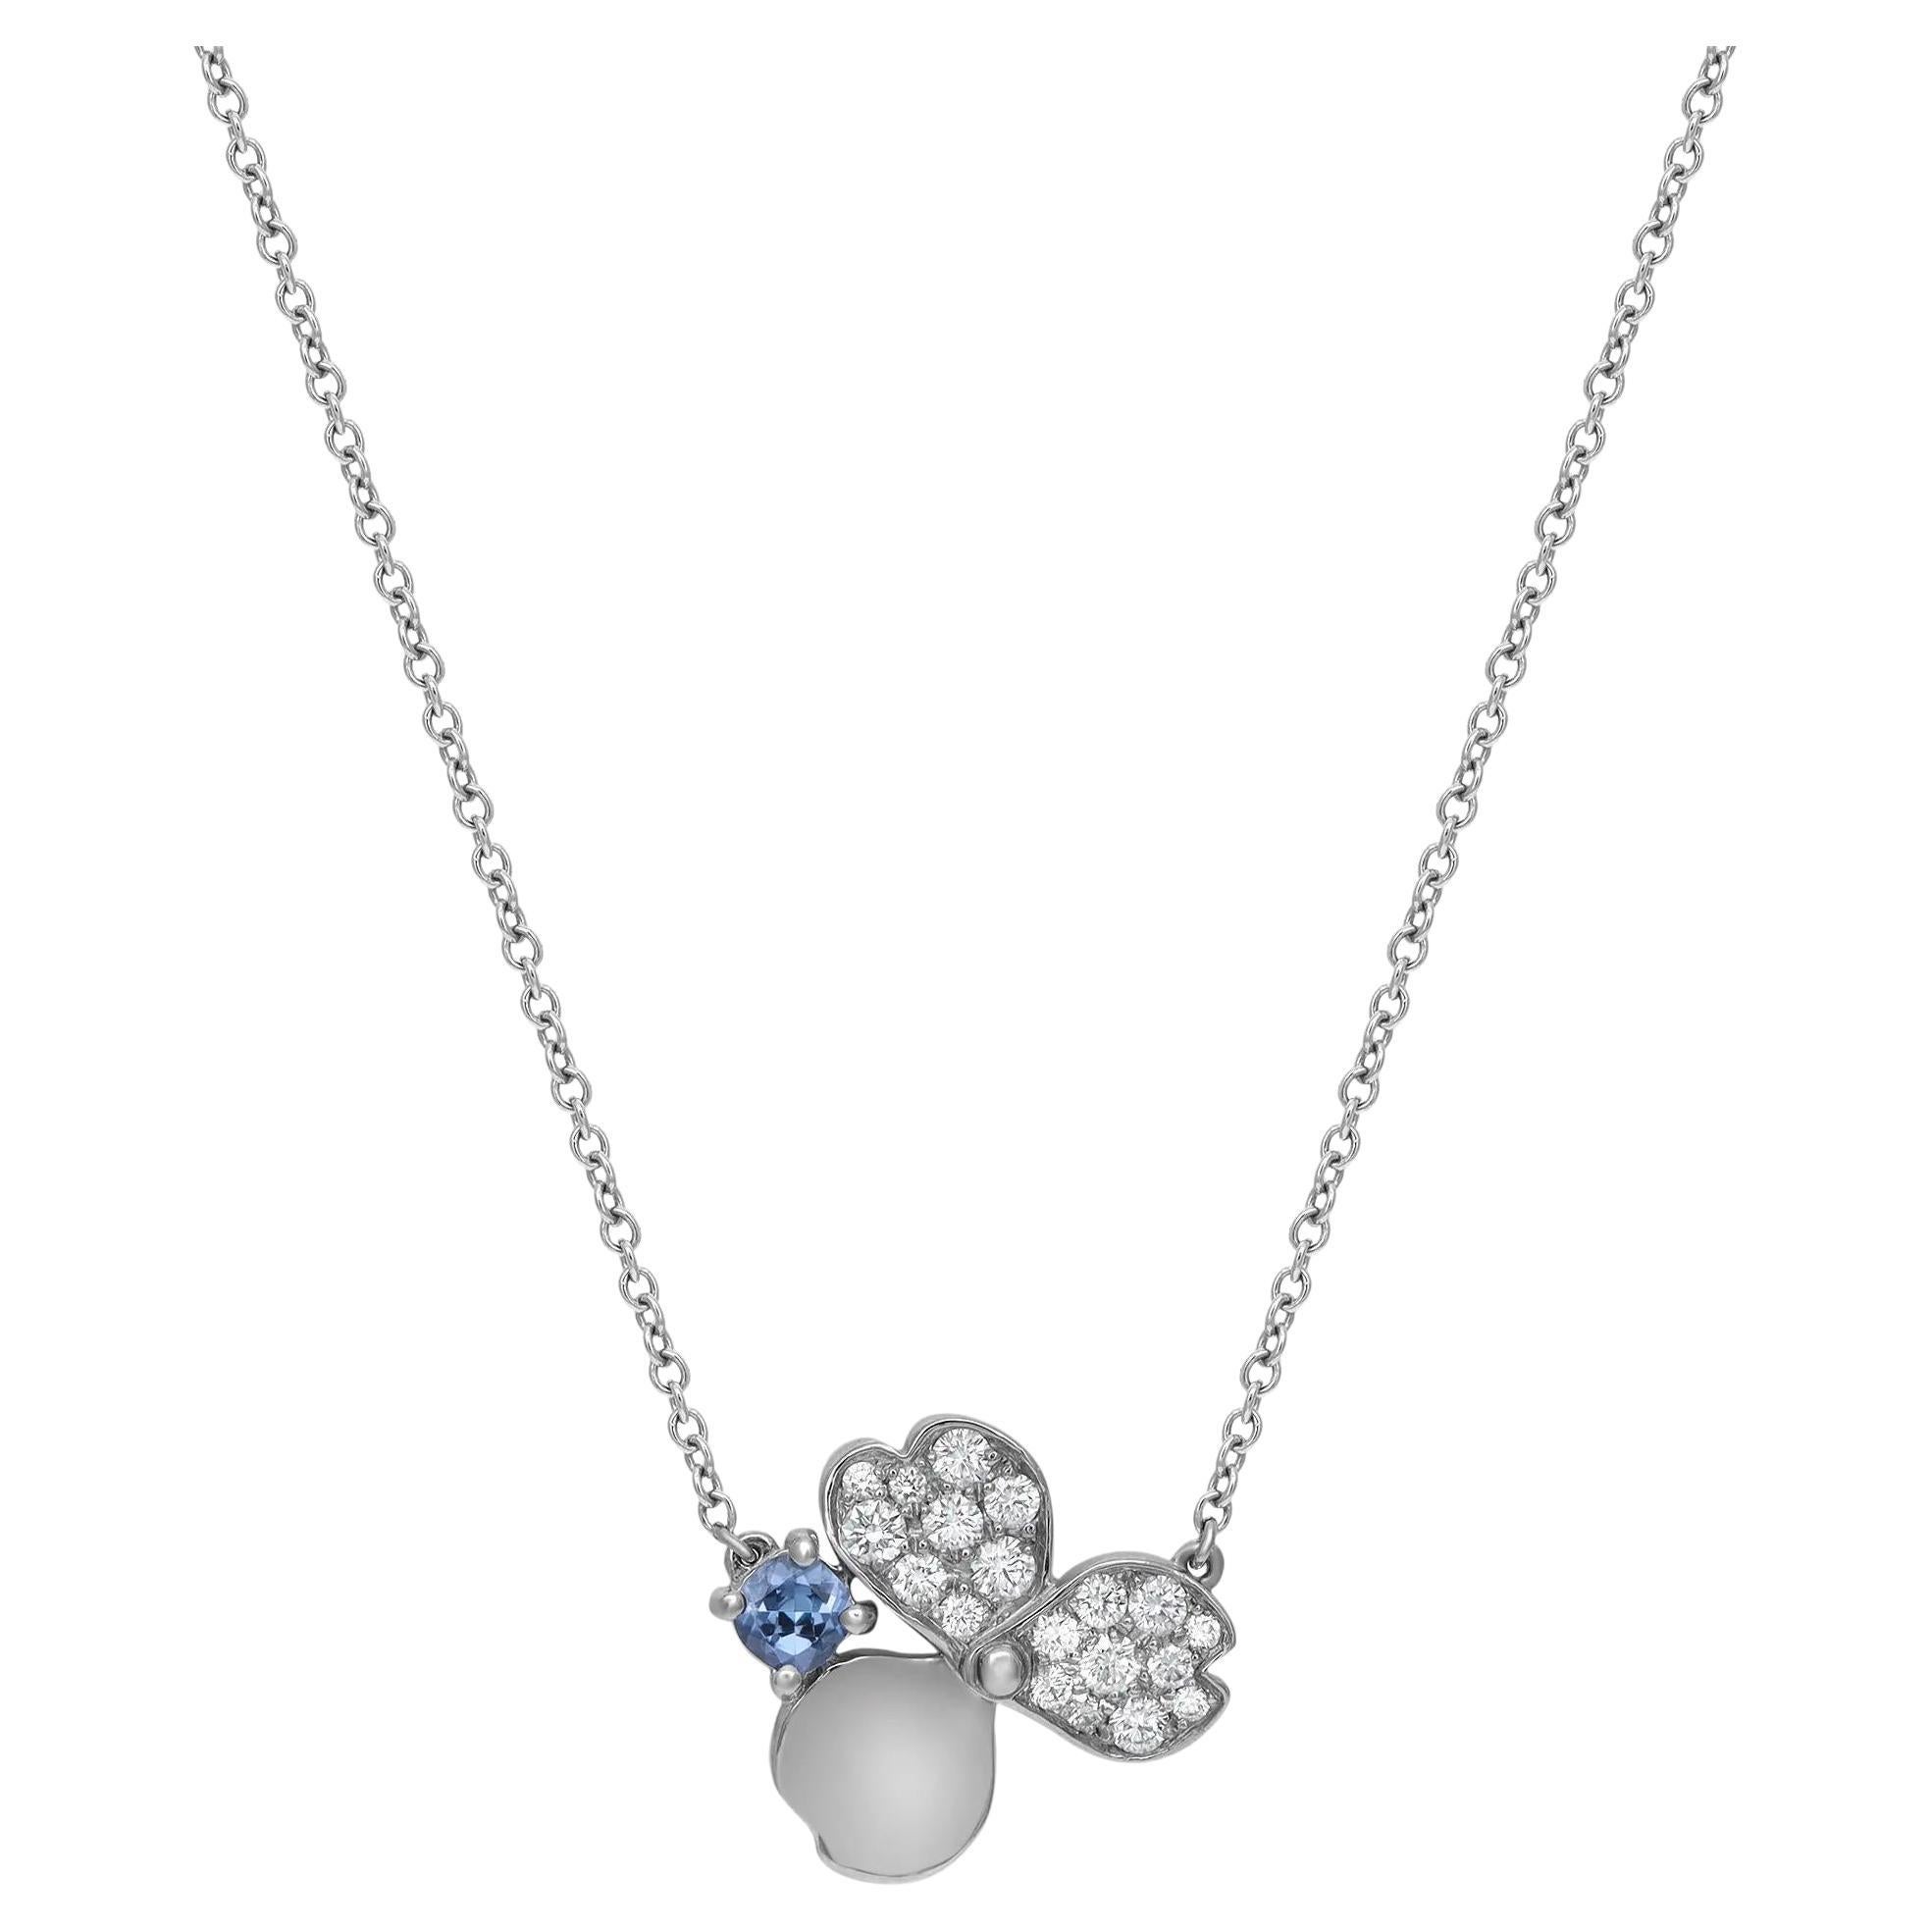 Tiffany & Co Paper Flowers Diamond and Tanzanite Pendant Necklace Platinum 16 in